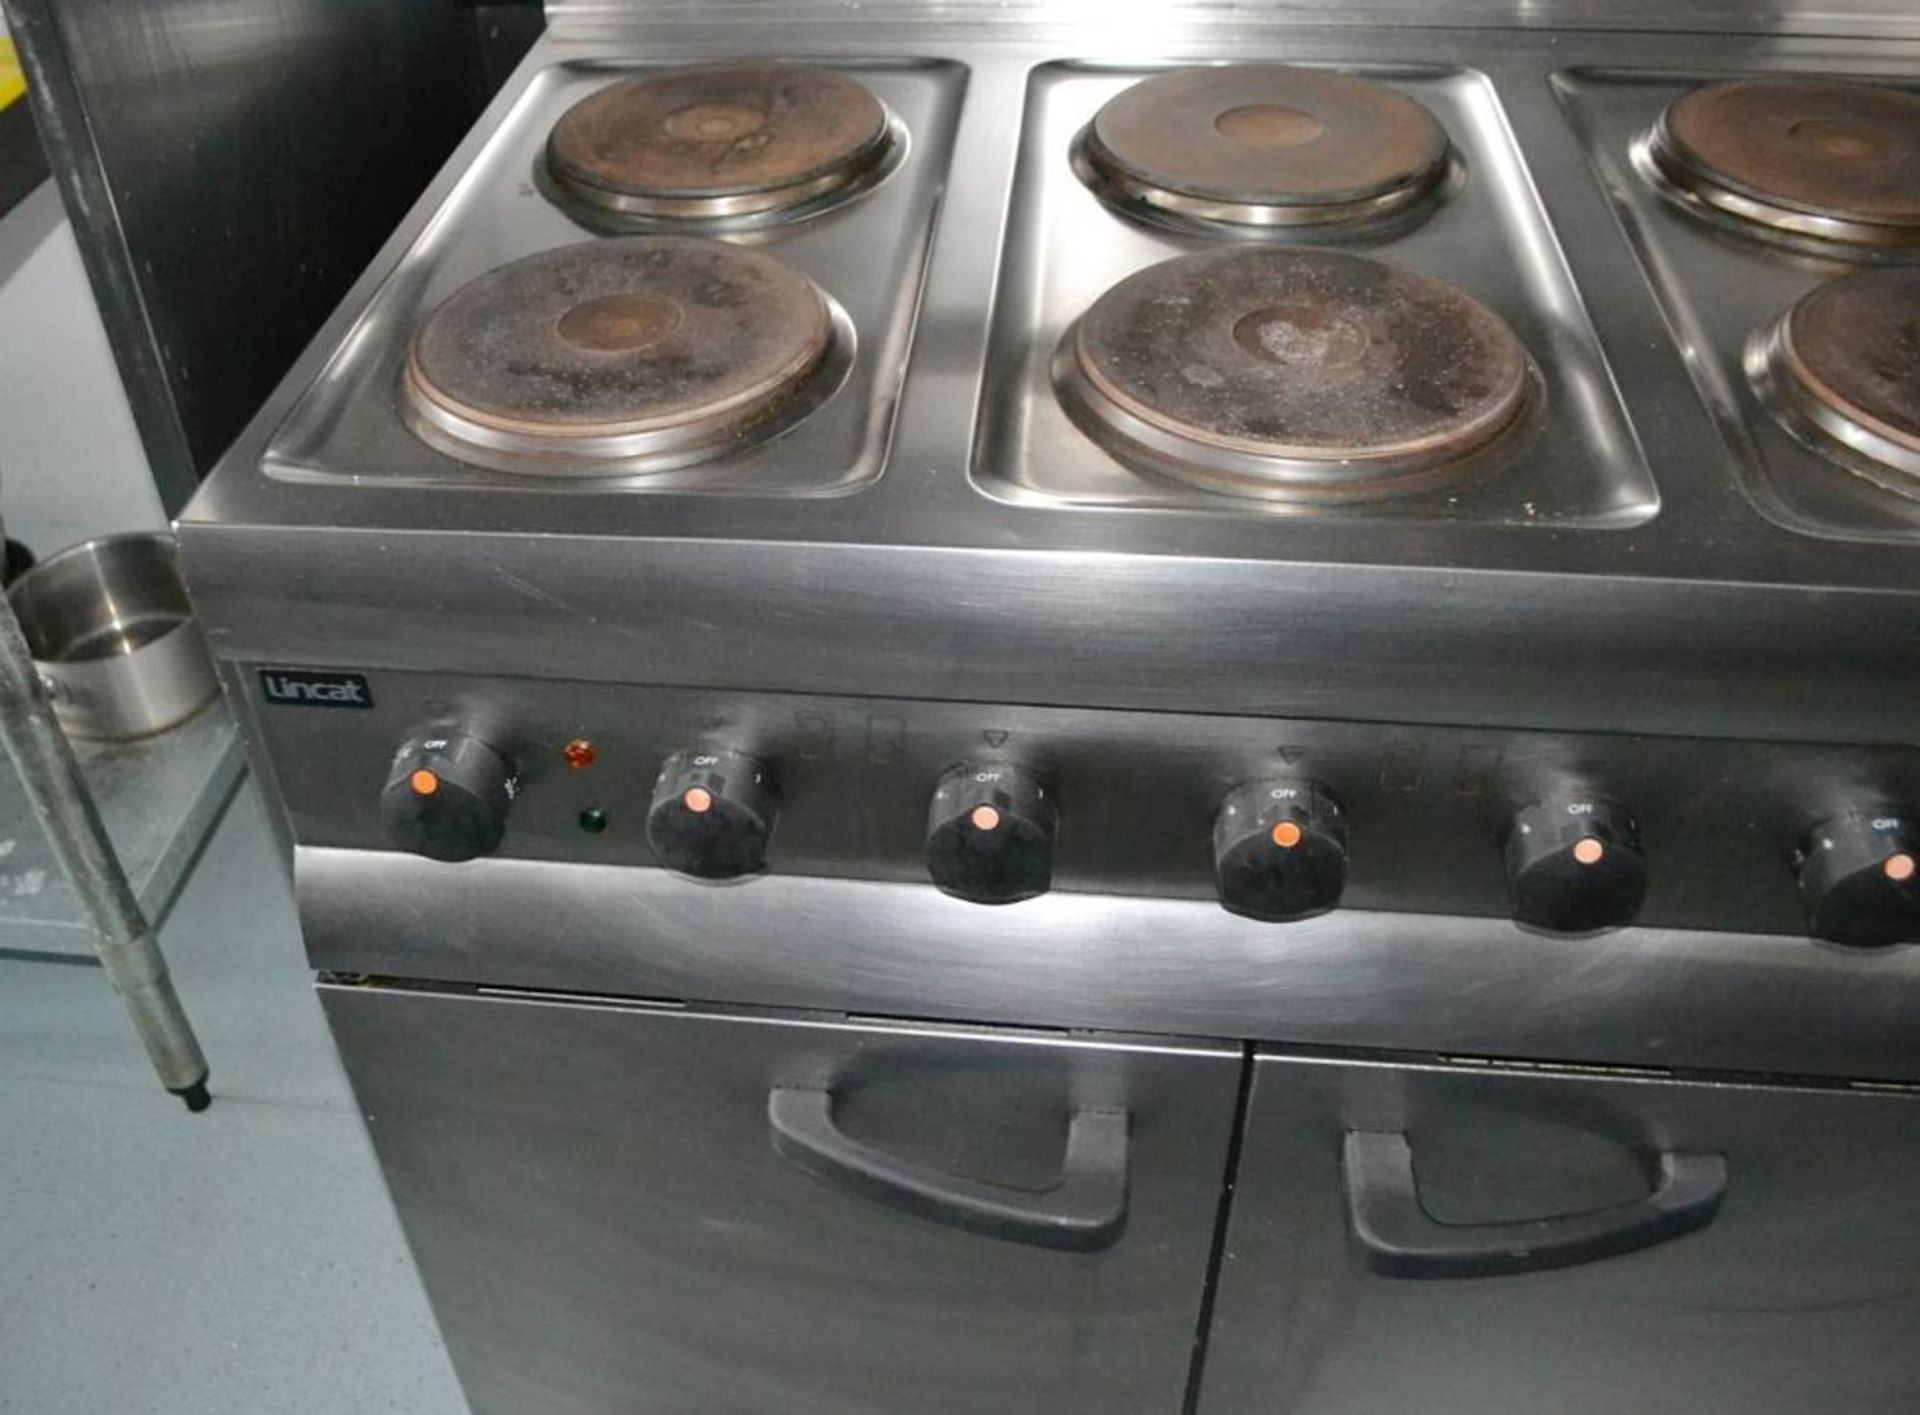 1 x Lincat Silverlink 6 Plate Commercial Electric Burner and Extraction Unit - CL425 - Location: Alt - Image 12 of 16